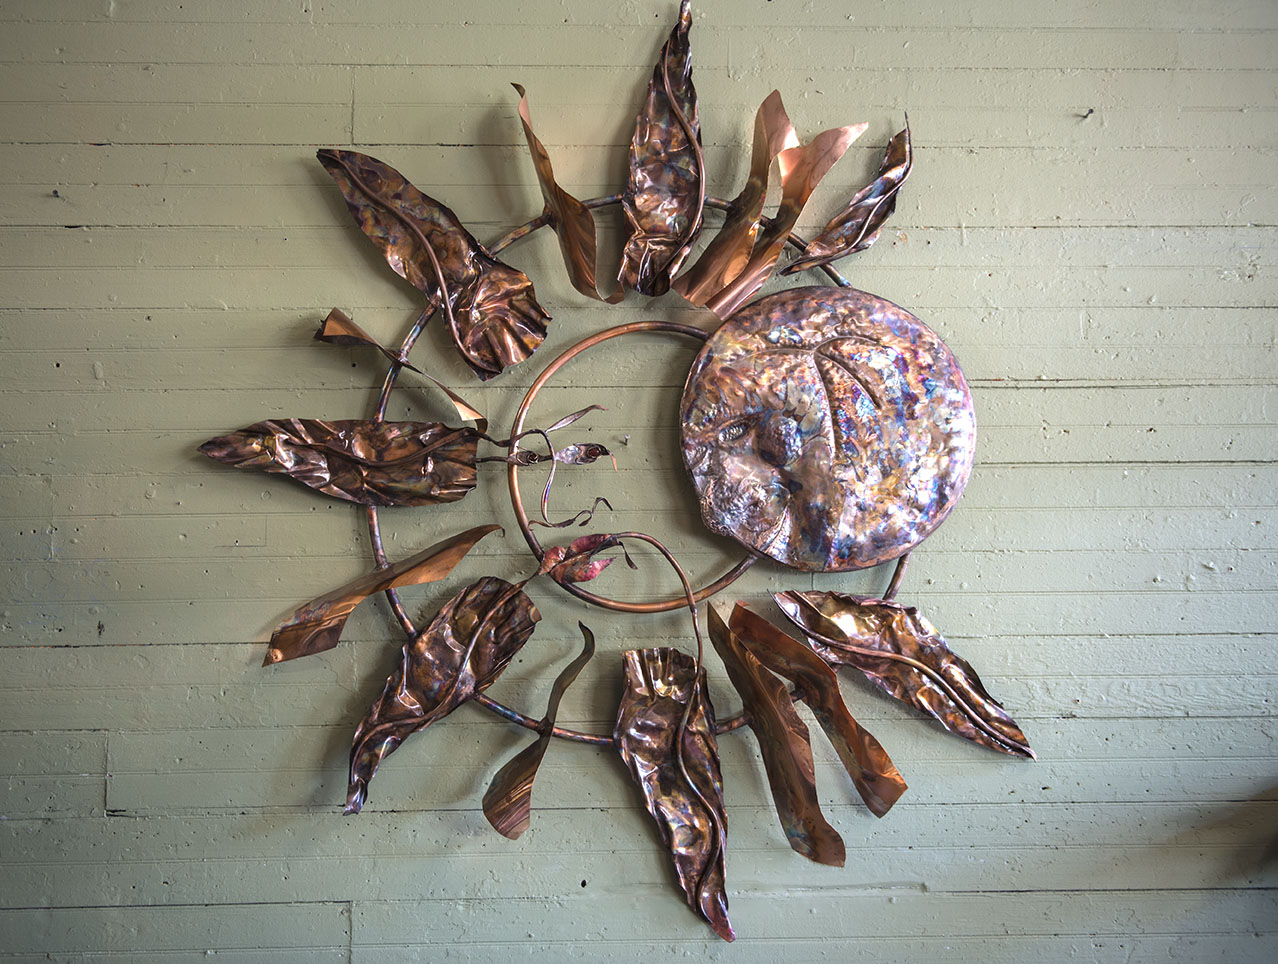 One of Dave Dardis’ eclipse metal sculptures hangs on the wall Tuesday, Aug. 8, 2017, in his studio in Makanda. (Athena Chrysanthou | @Chrysant1Athena)